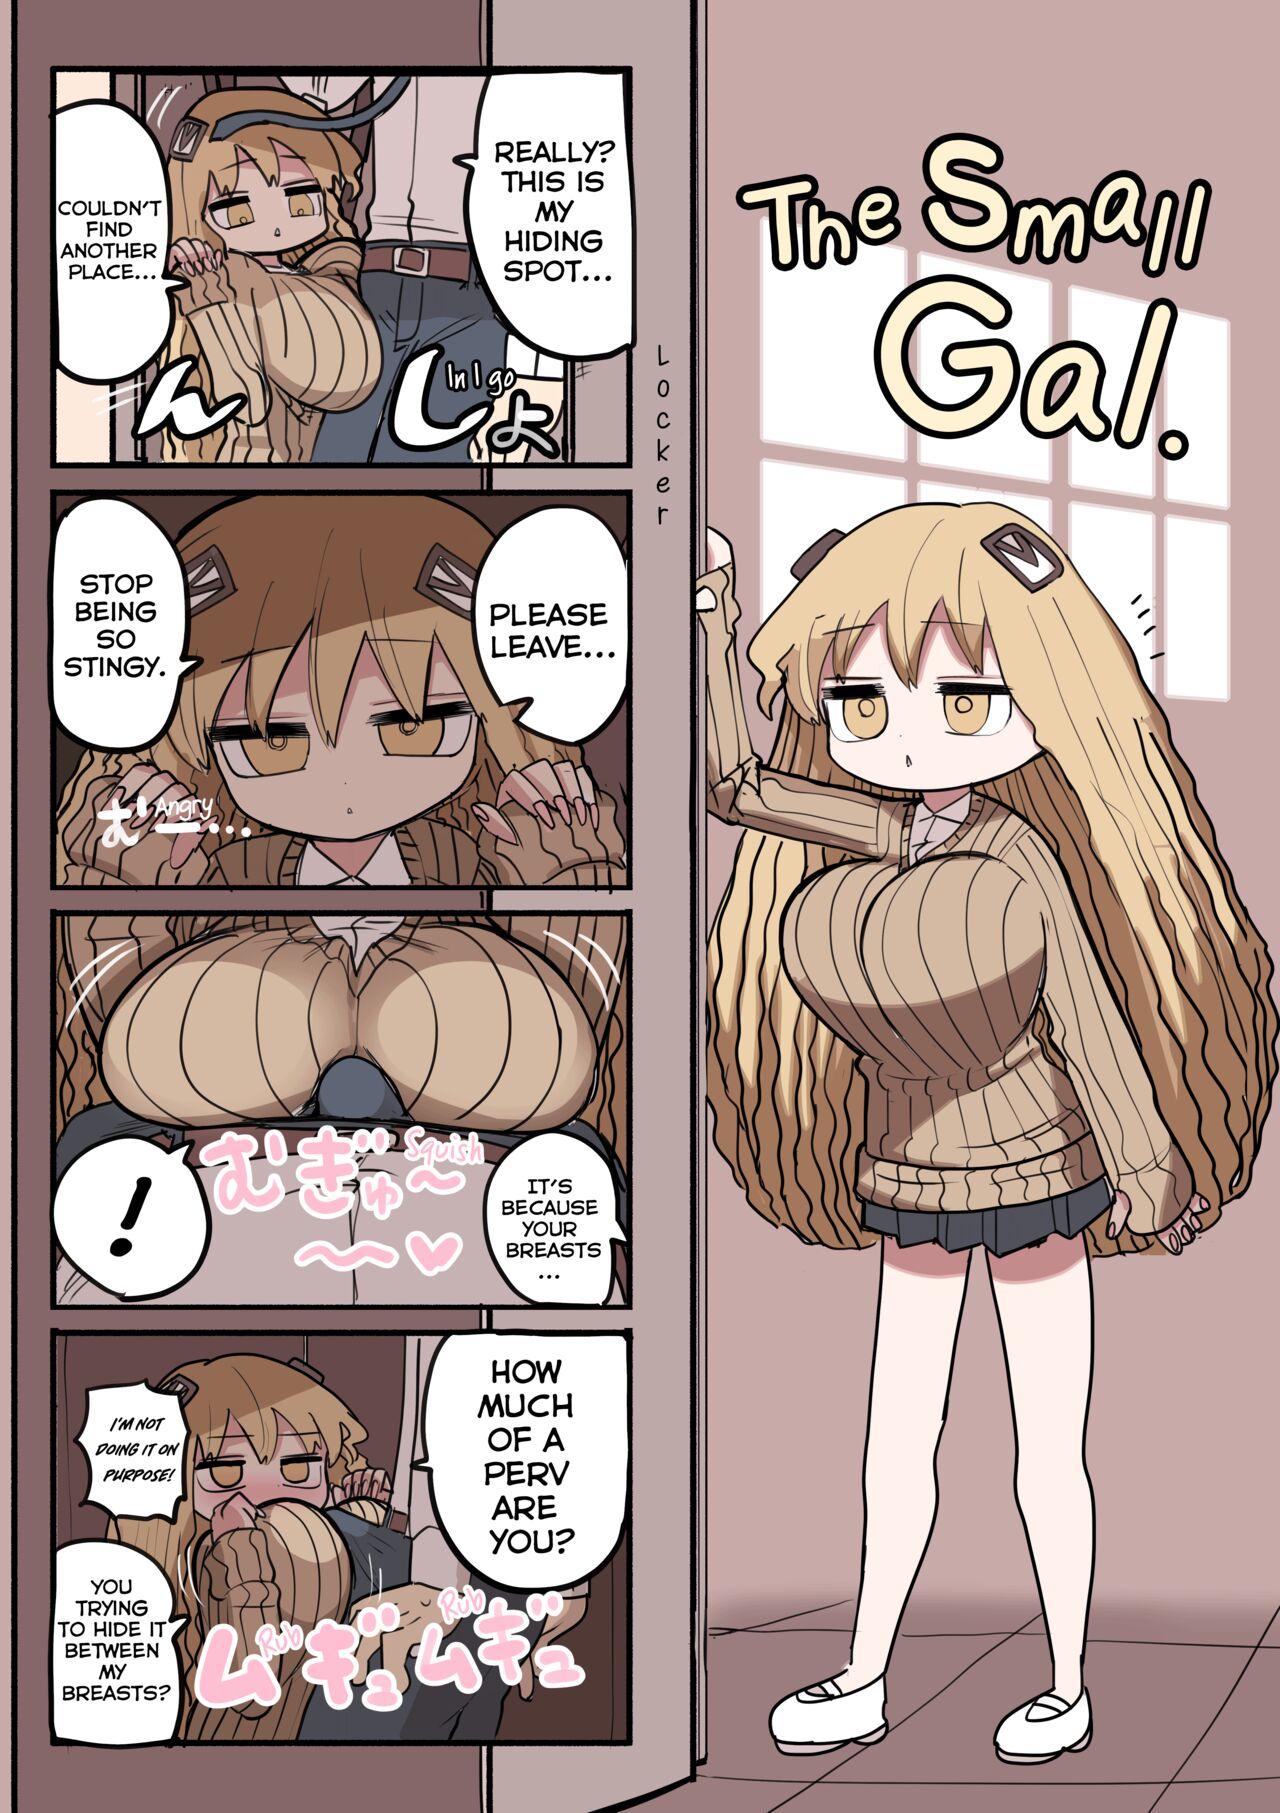 Chiisai Gal | The Small Gal 15